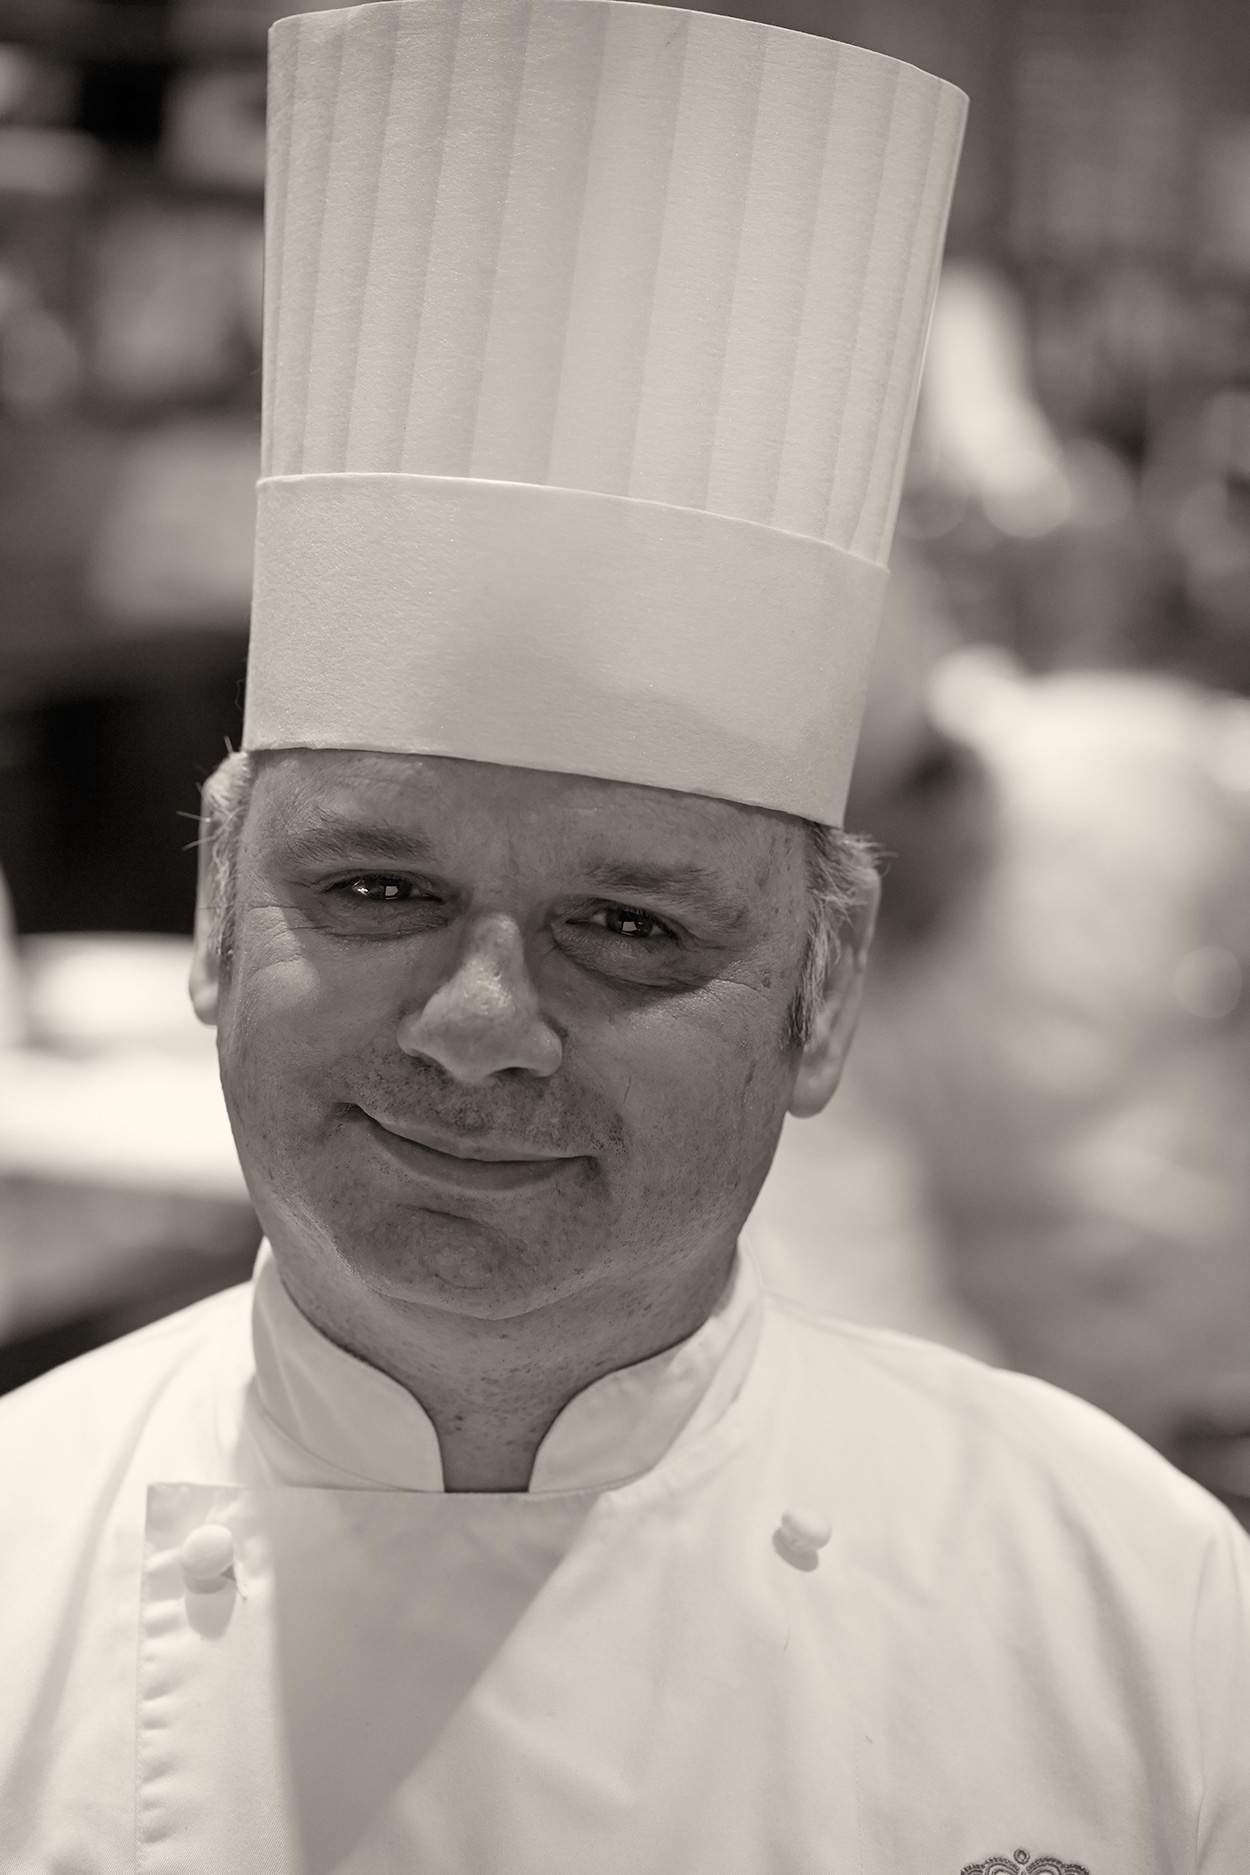 maitre cuisinier de france jacques sorci reflects on his experience as executive chef at lotte